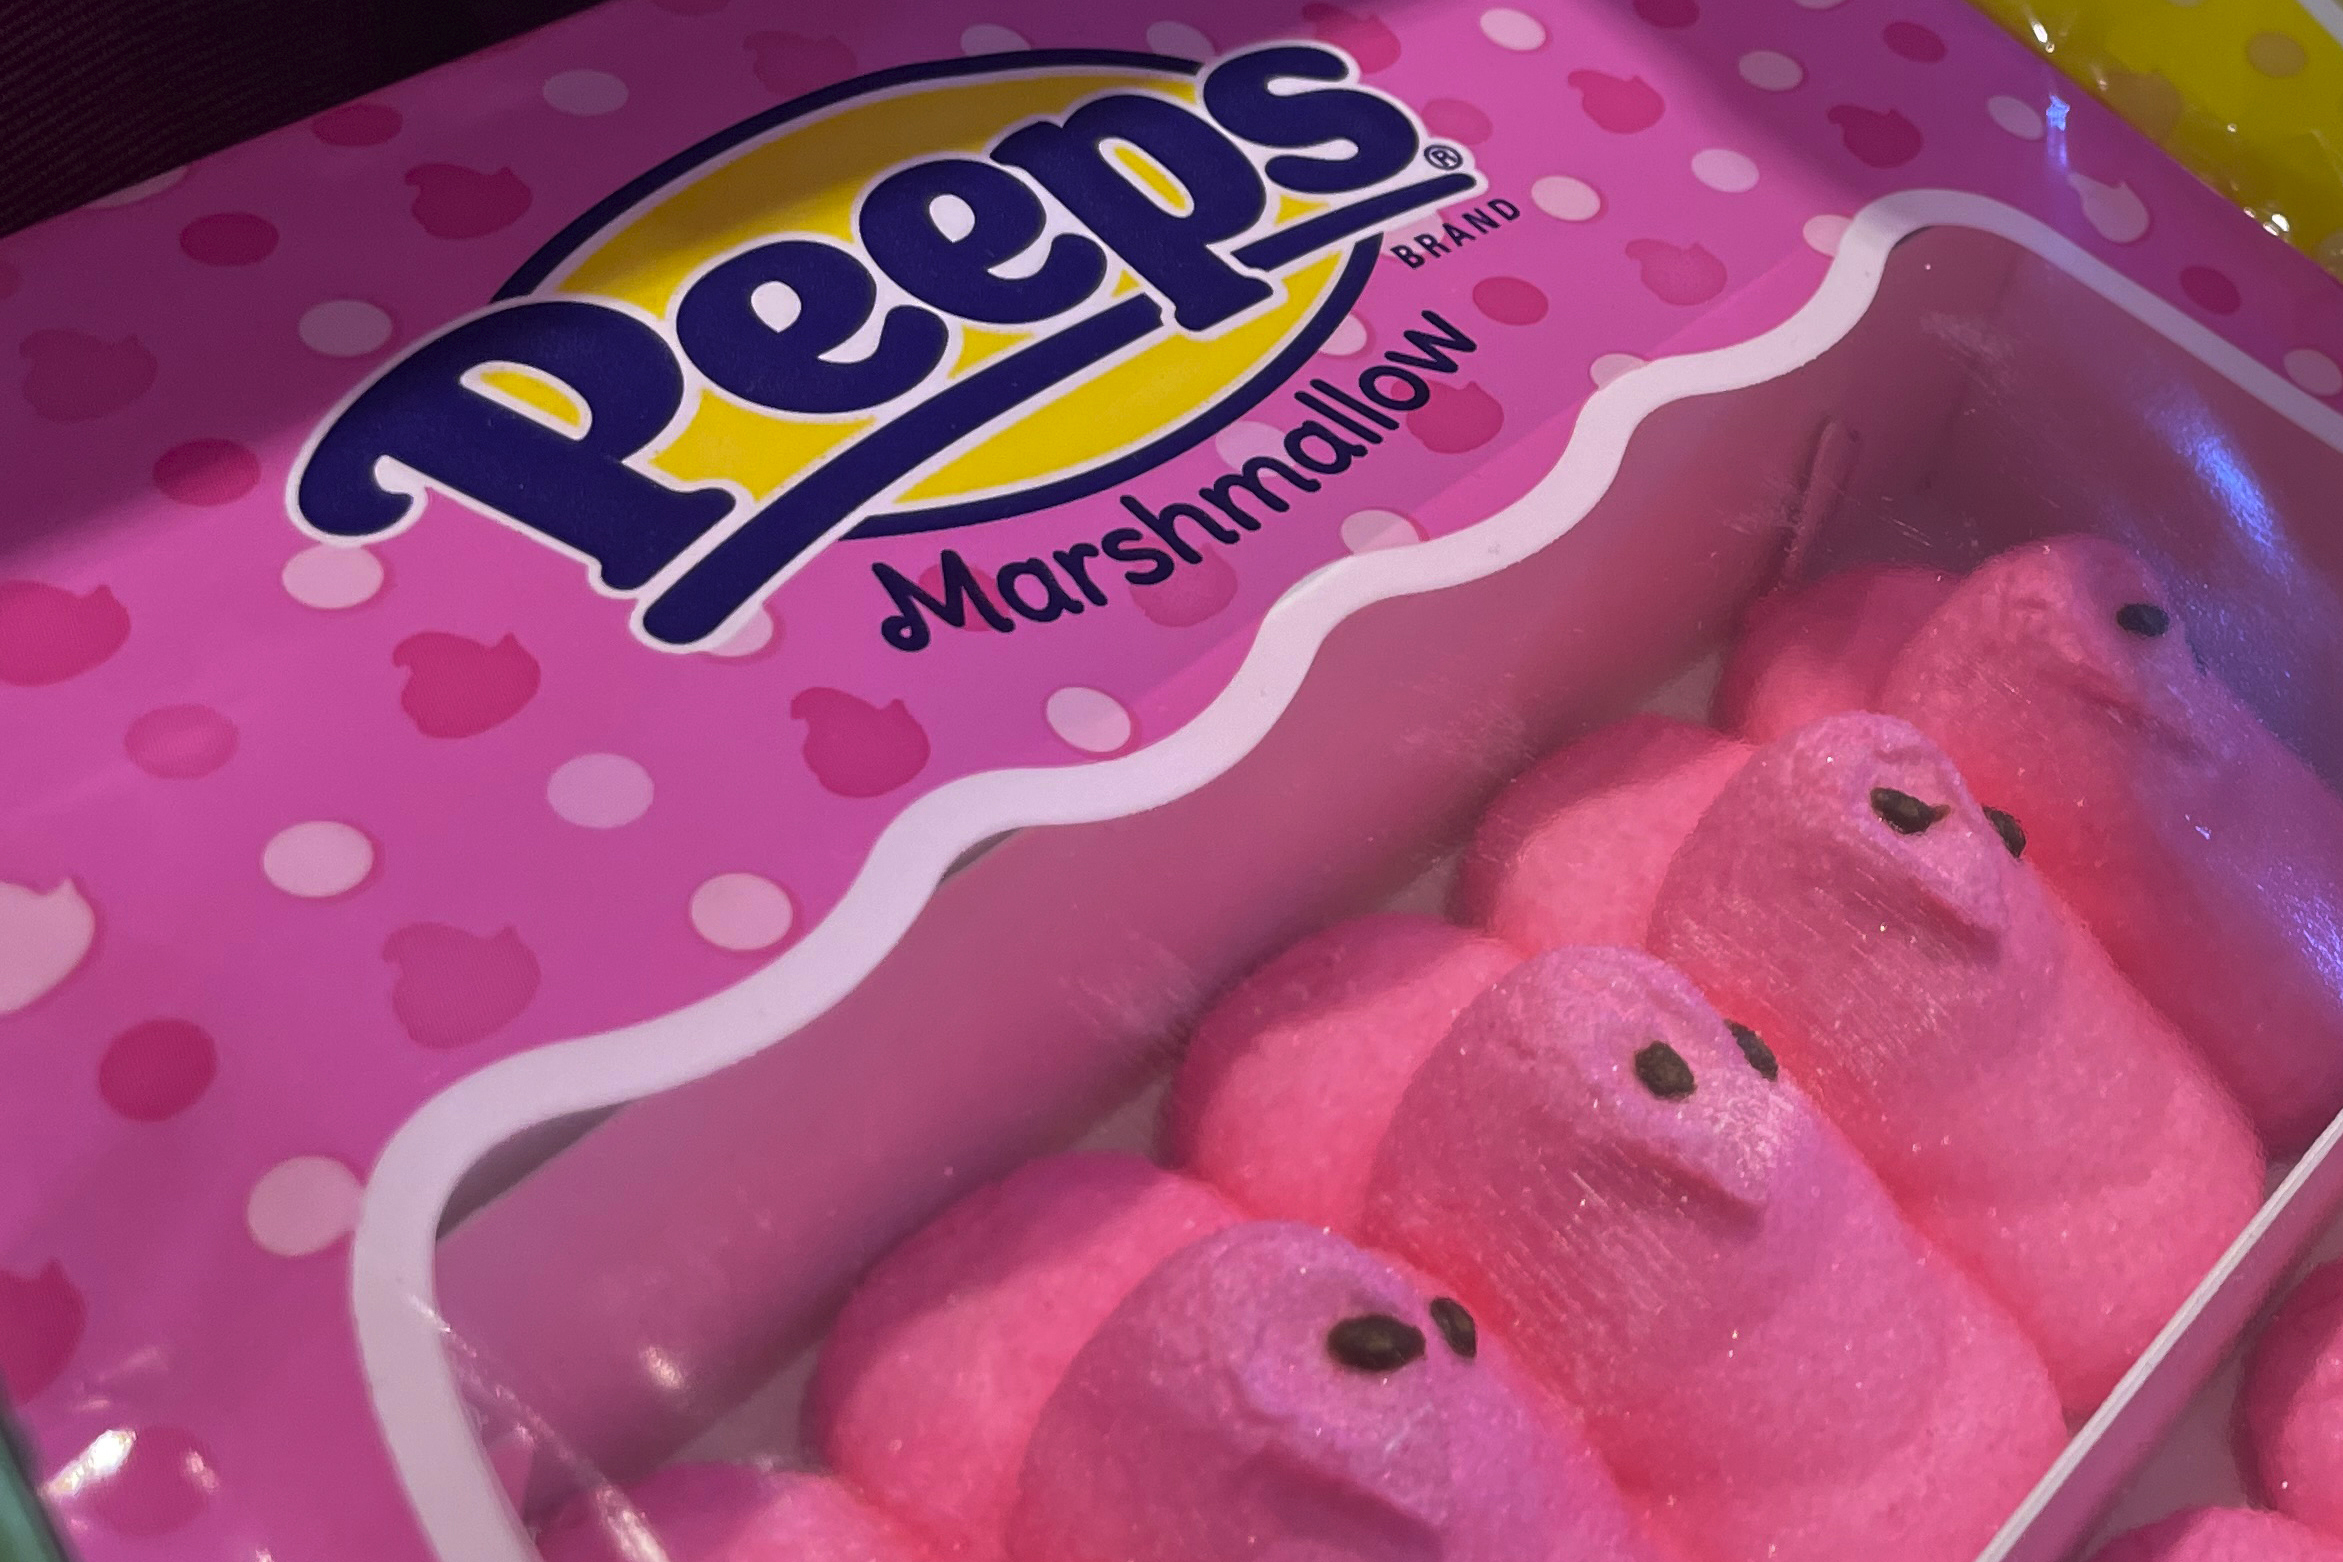 State Lawmaker Wants Peeps To Drop Cancer-Linked Ingredients